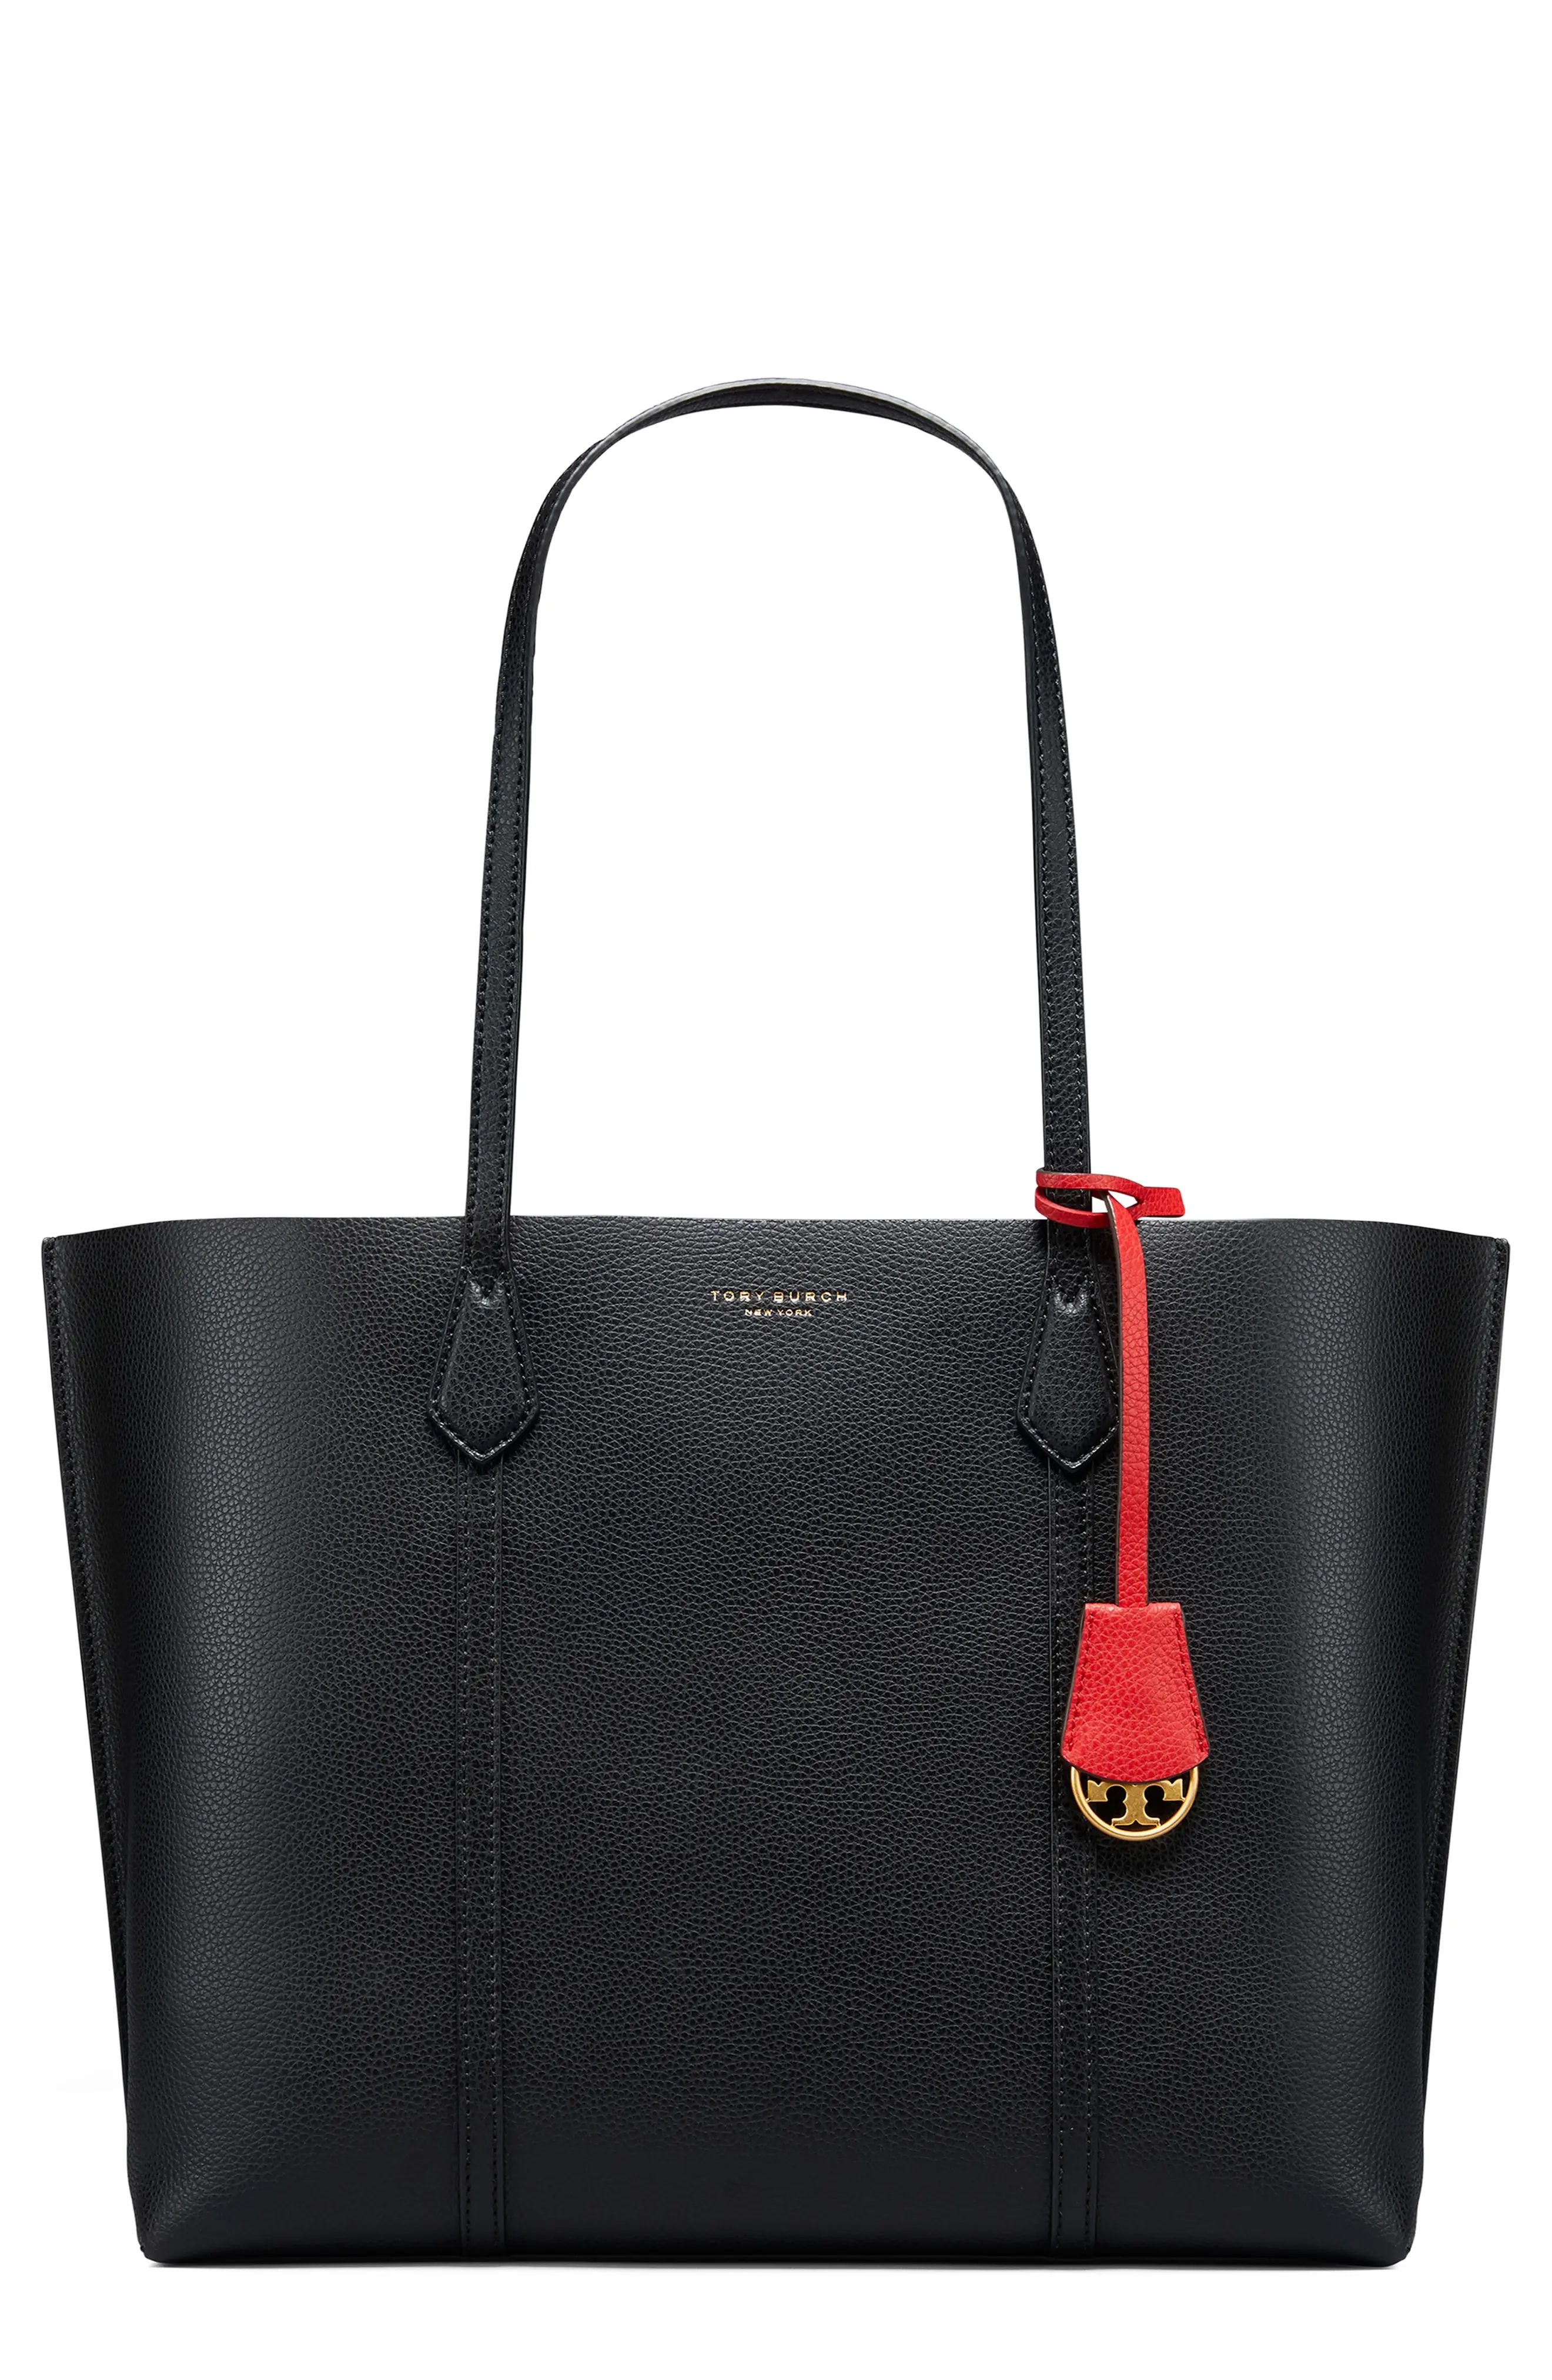 Tory Burch Perry Leather Tote - Black | Nordstrom